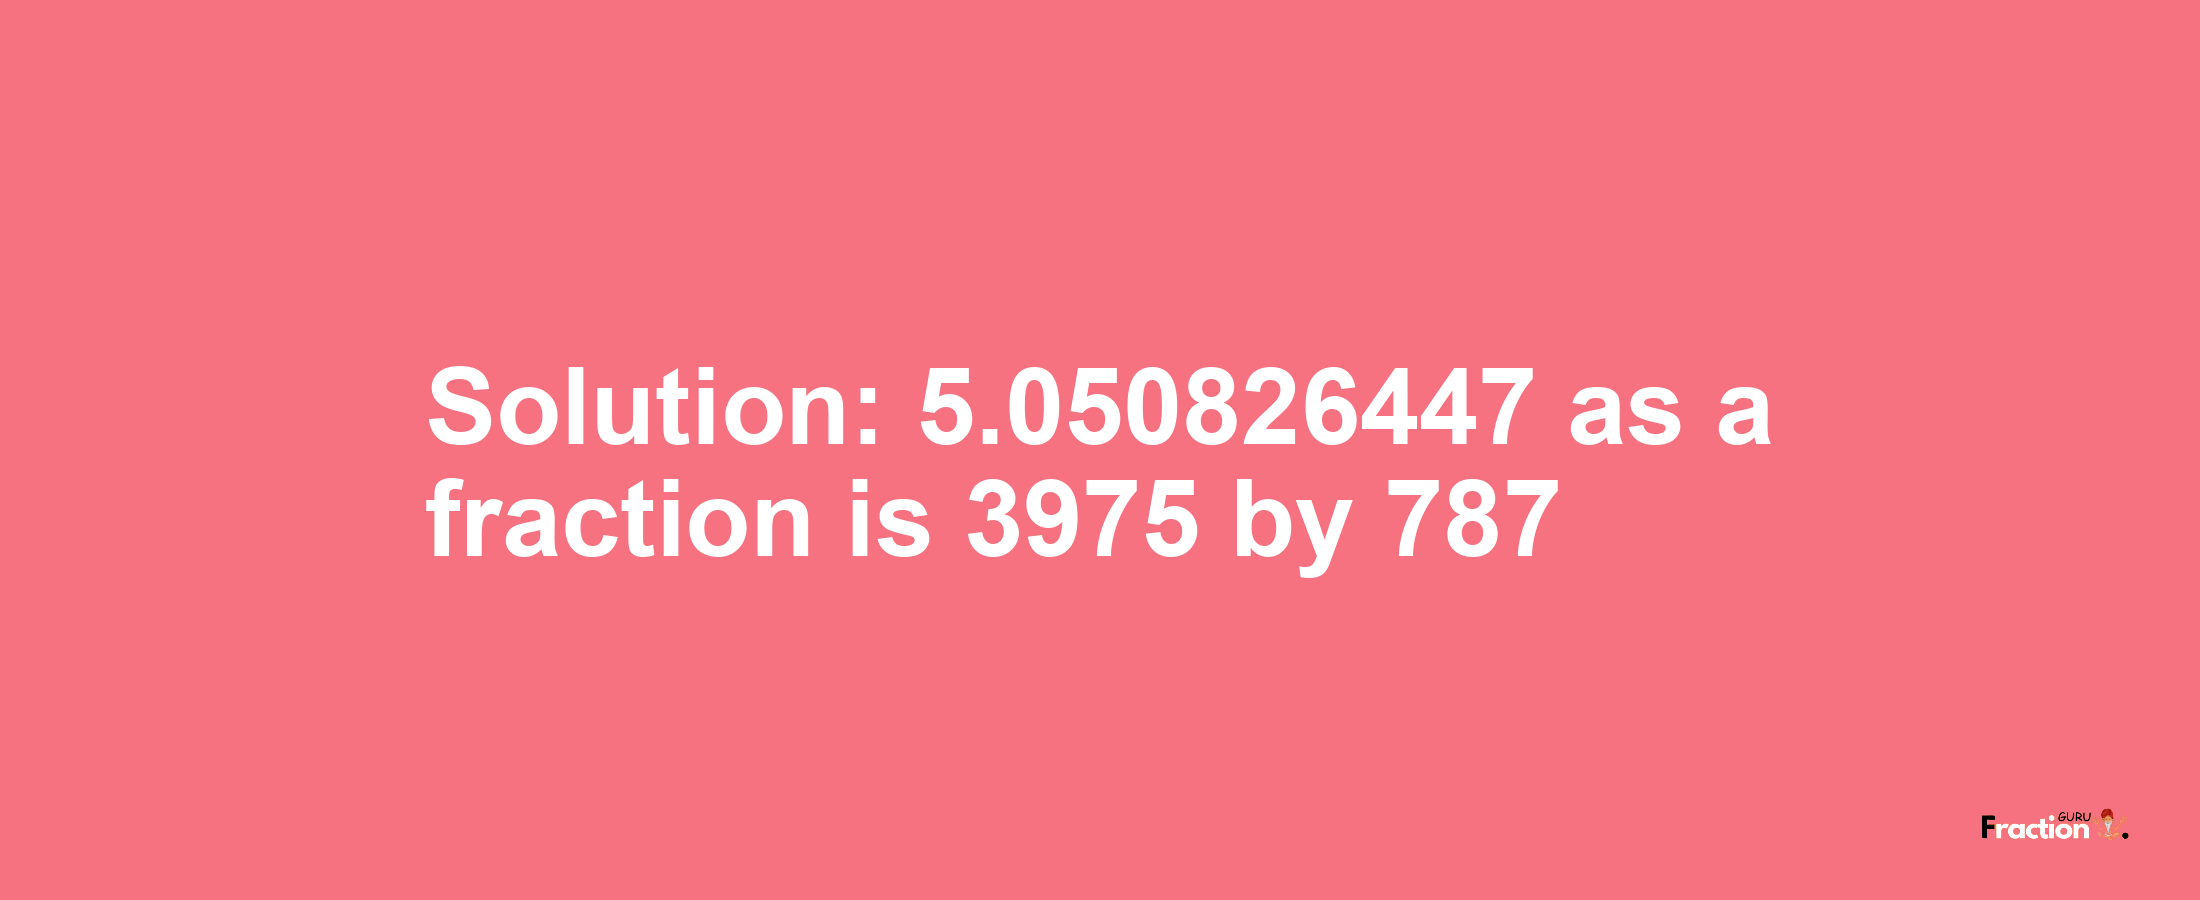 Solution:5.050826447 as a fraction is 3975/787